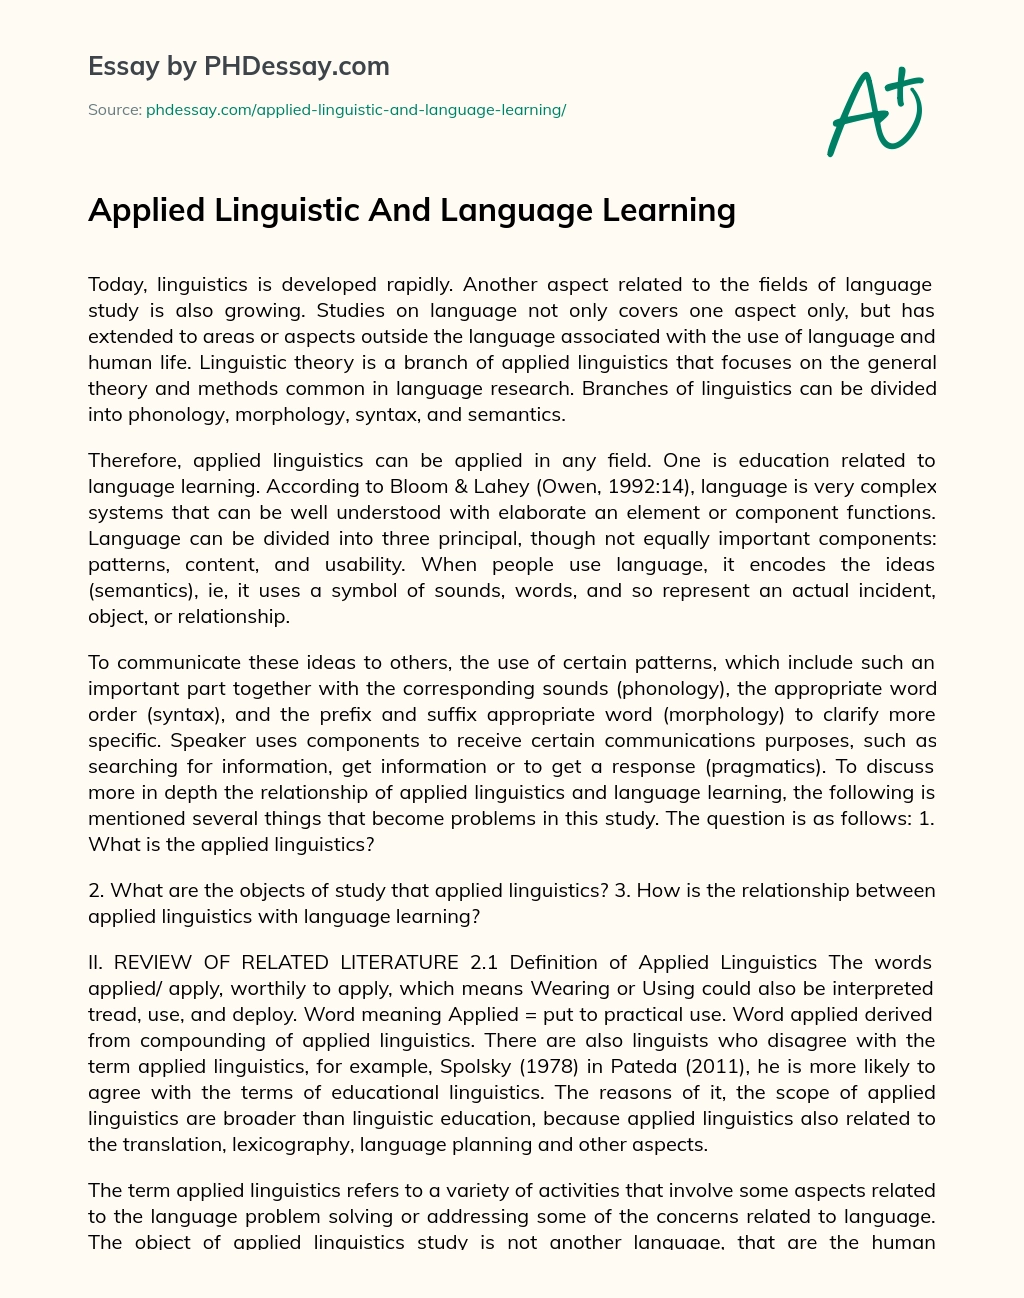 Applied Linguistic And Language Learning essay